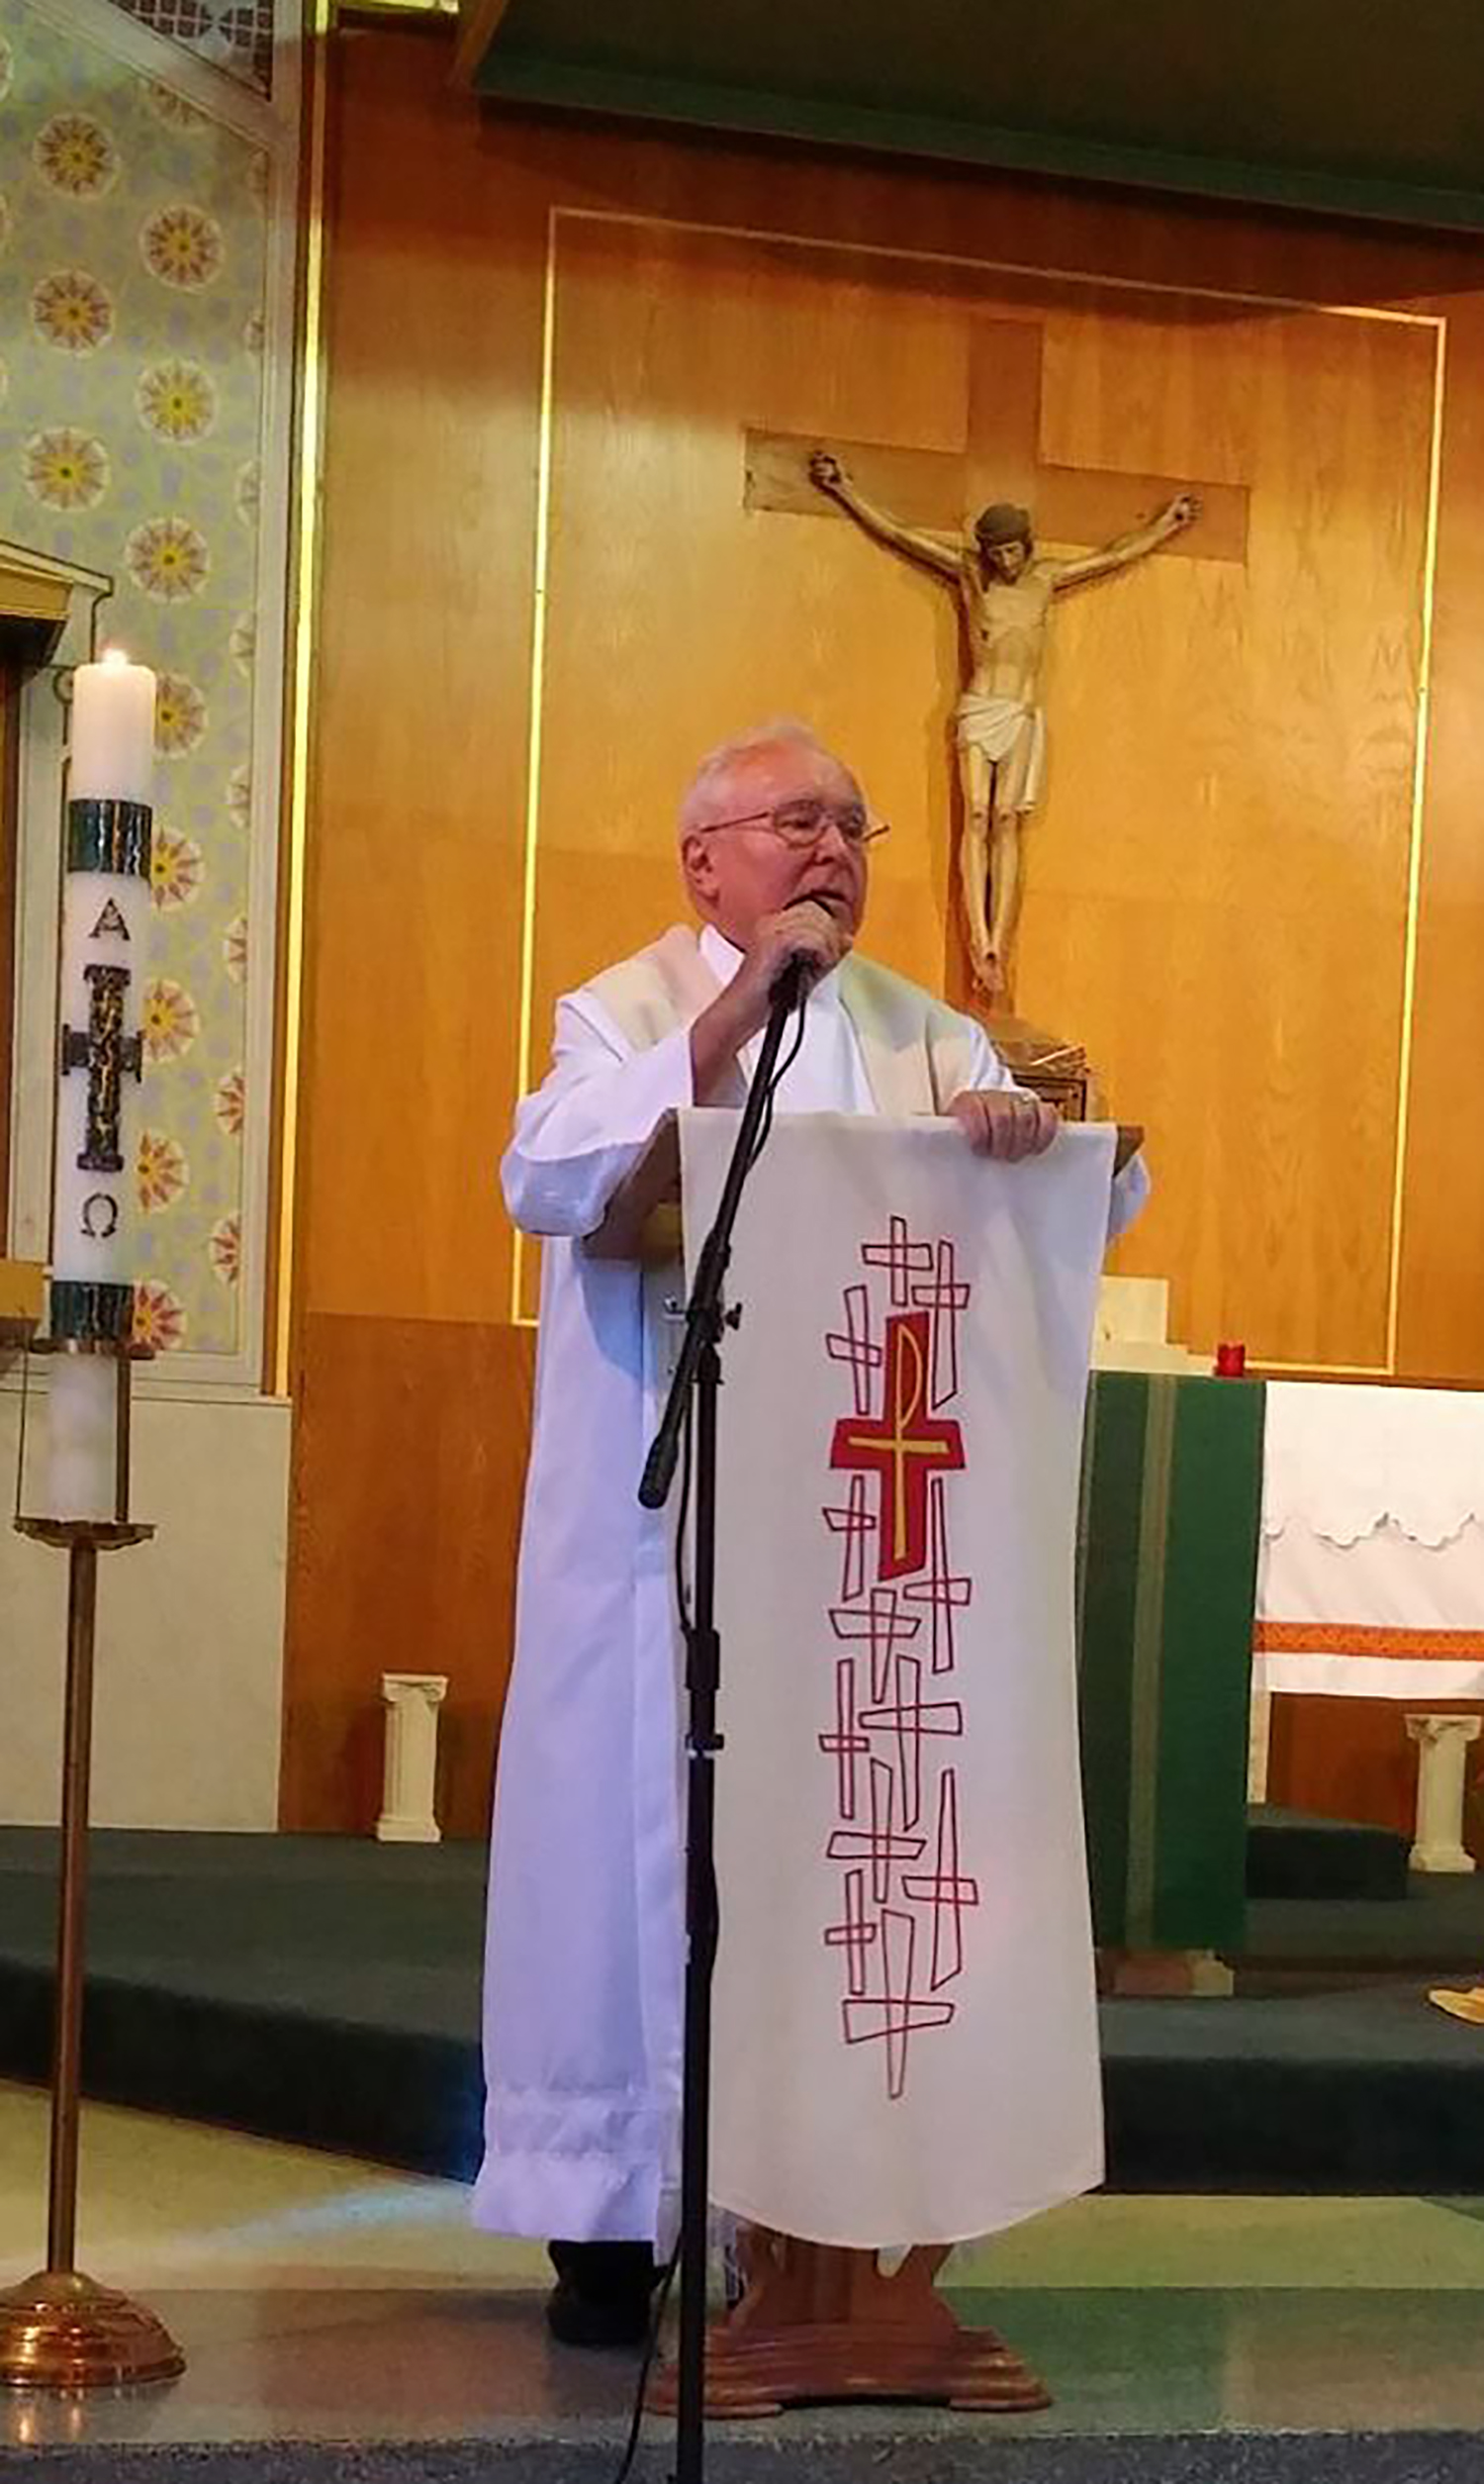 Fr Louie offers a homily during Mass at the Comboni Mission Center